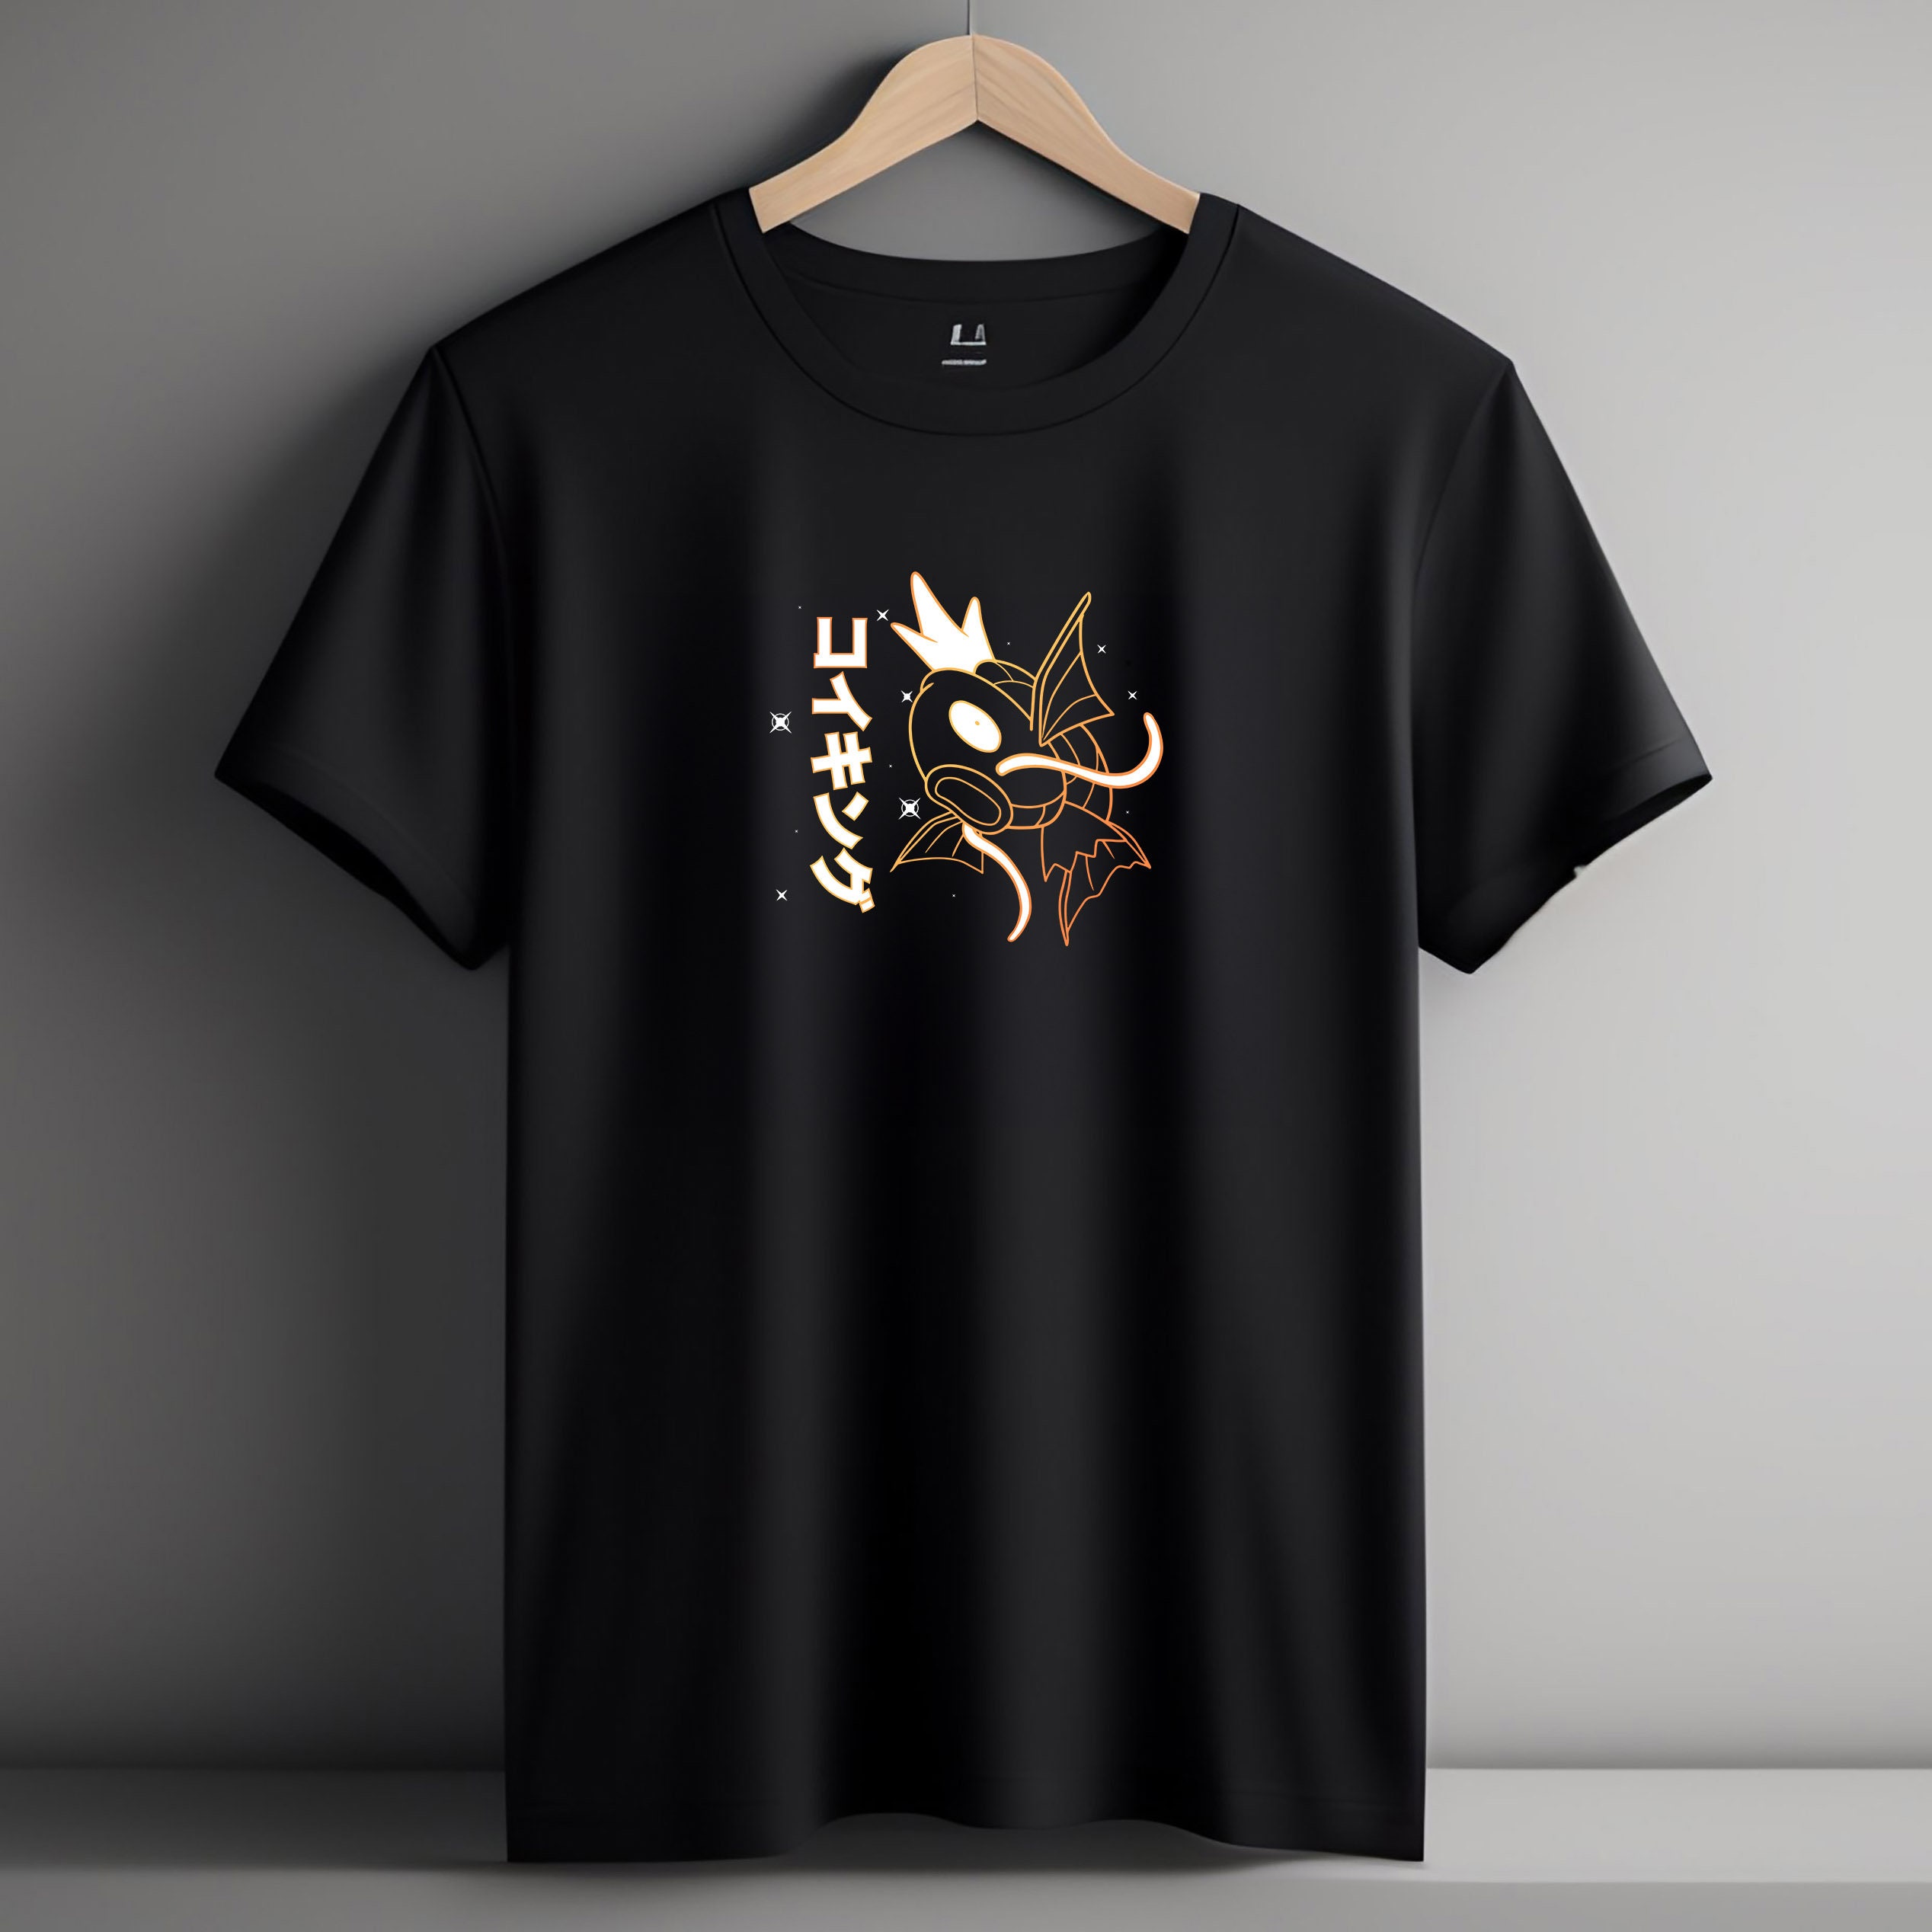 Magikarp Tee Perfect for a Gift, Present, Holiday, Birthday